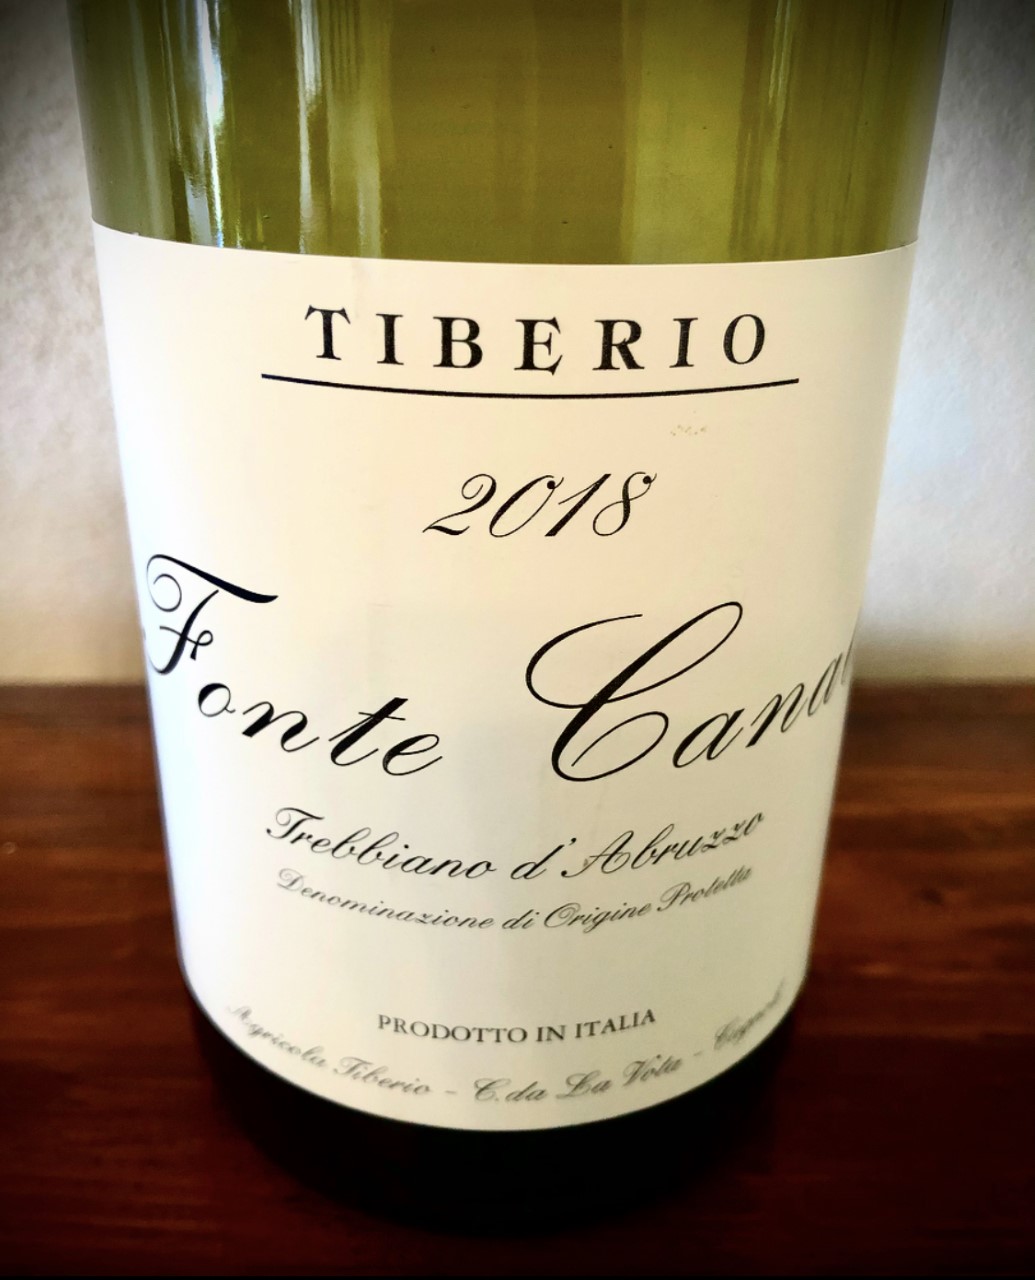 Tiberios-Trebbiano-dAbruzzo-Fonte-Canale-was-one-of-the-four-topscoring-wines-of-the-year-1-2-1-1-1-1-1